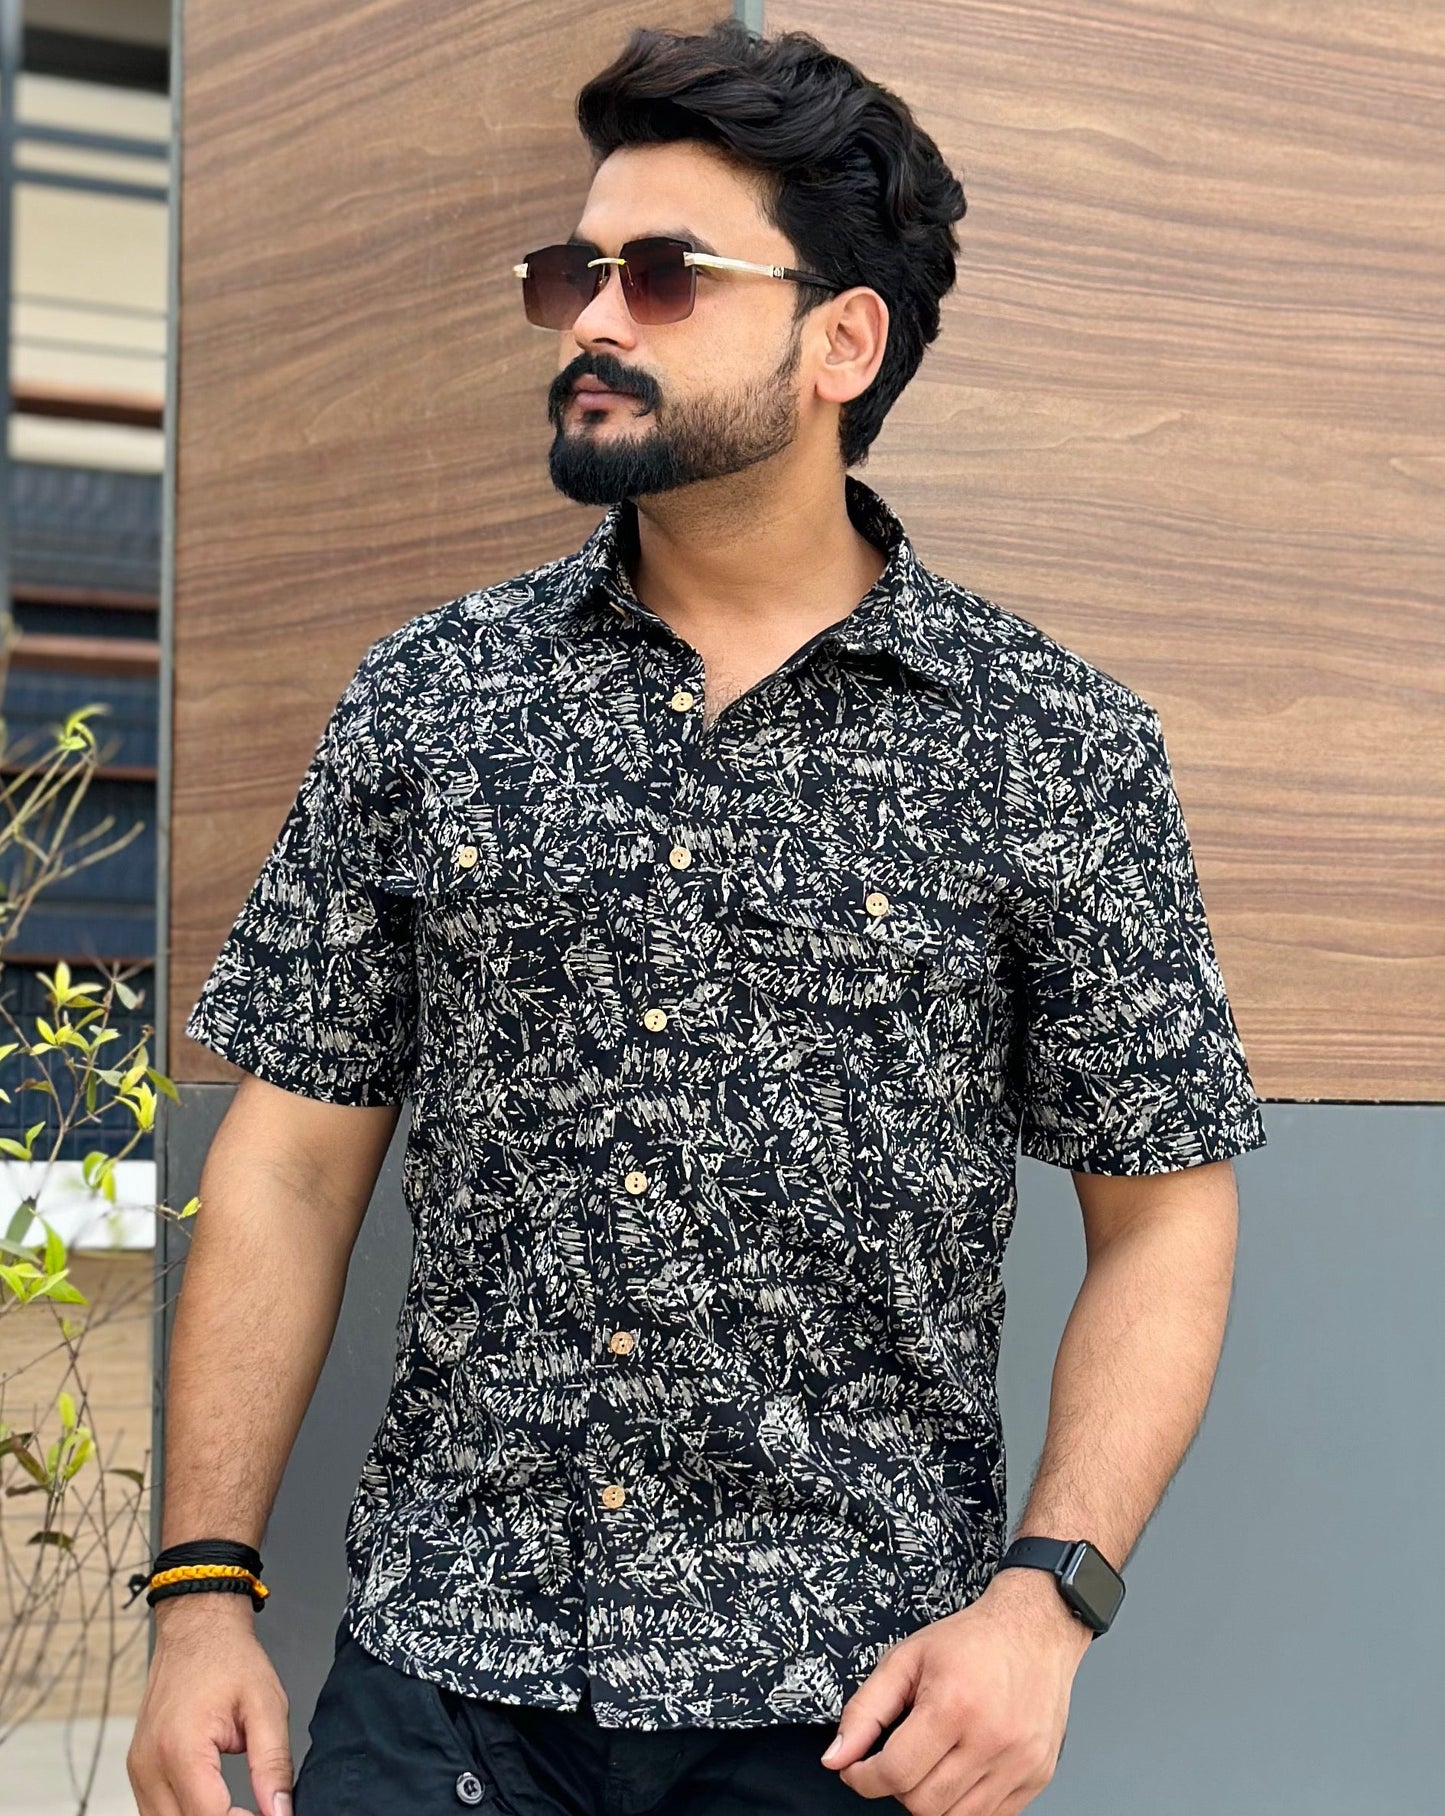 BLACK AND GOLDEN LEAFY PATTERN SHIRT